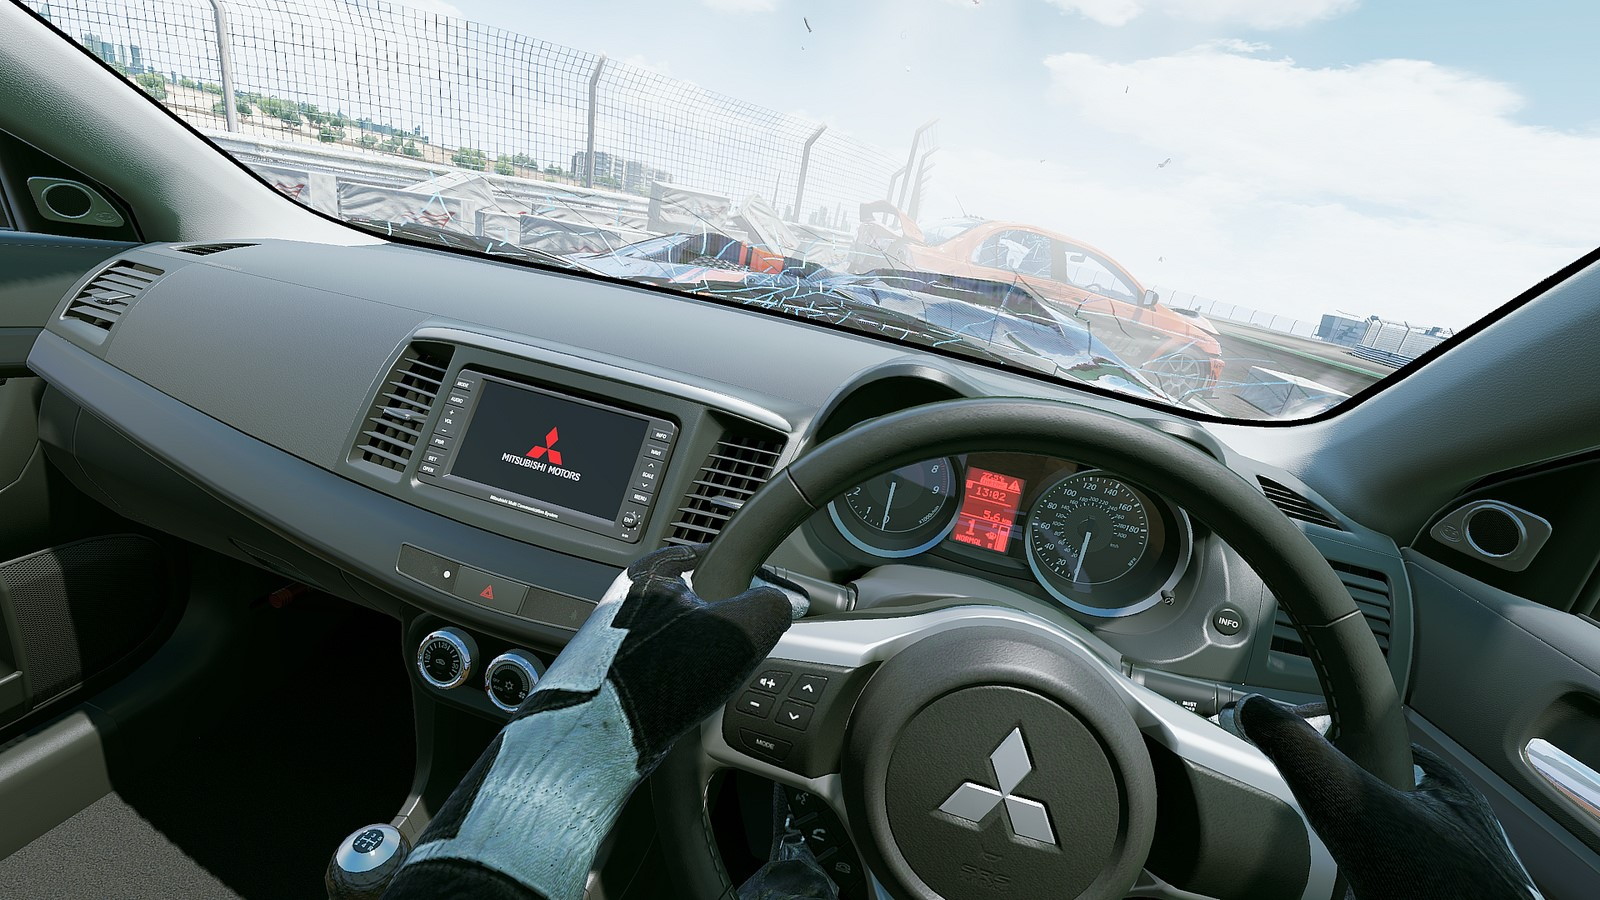 Project CARS video game